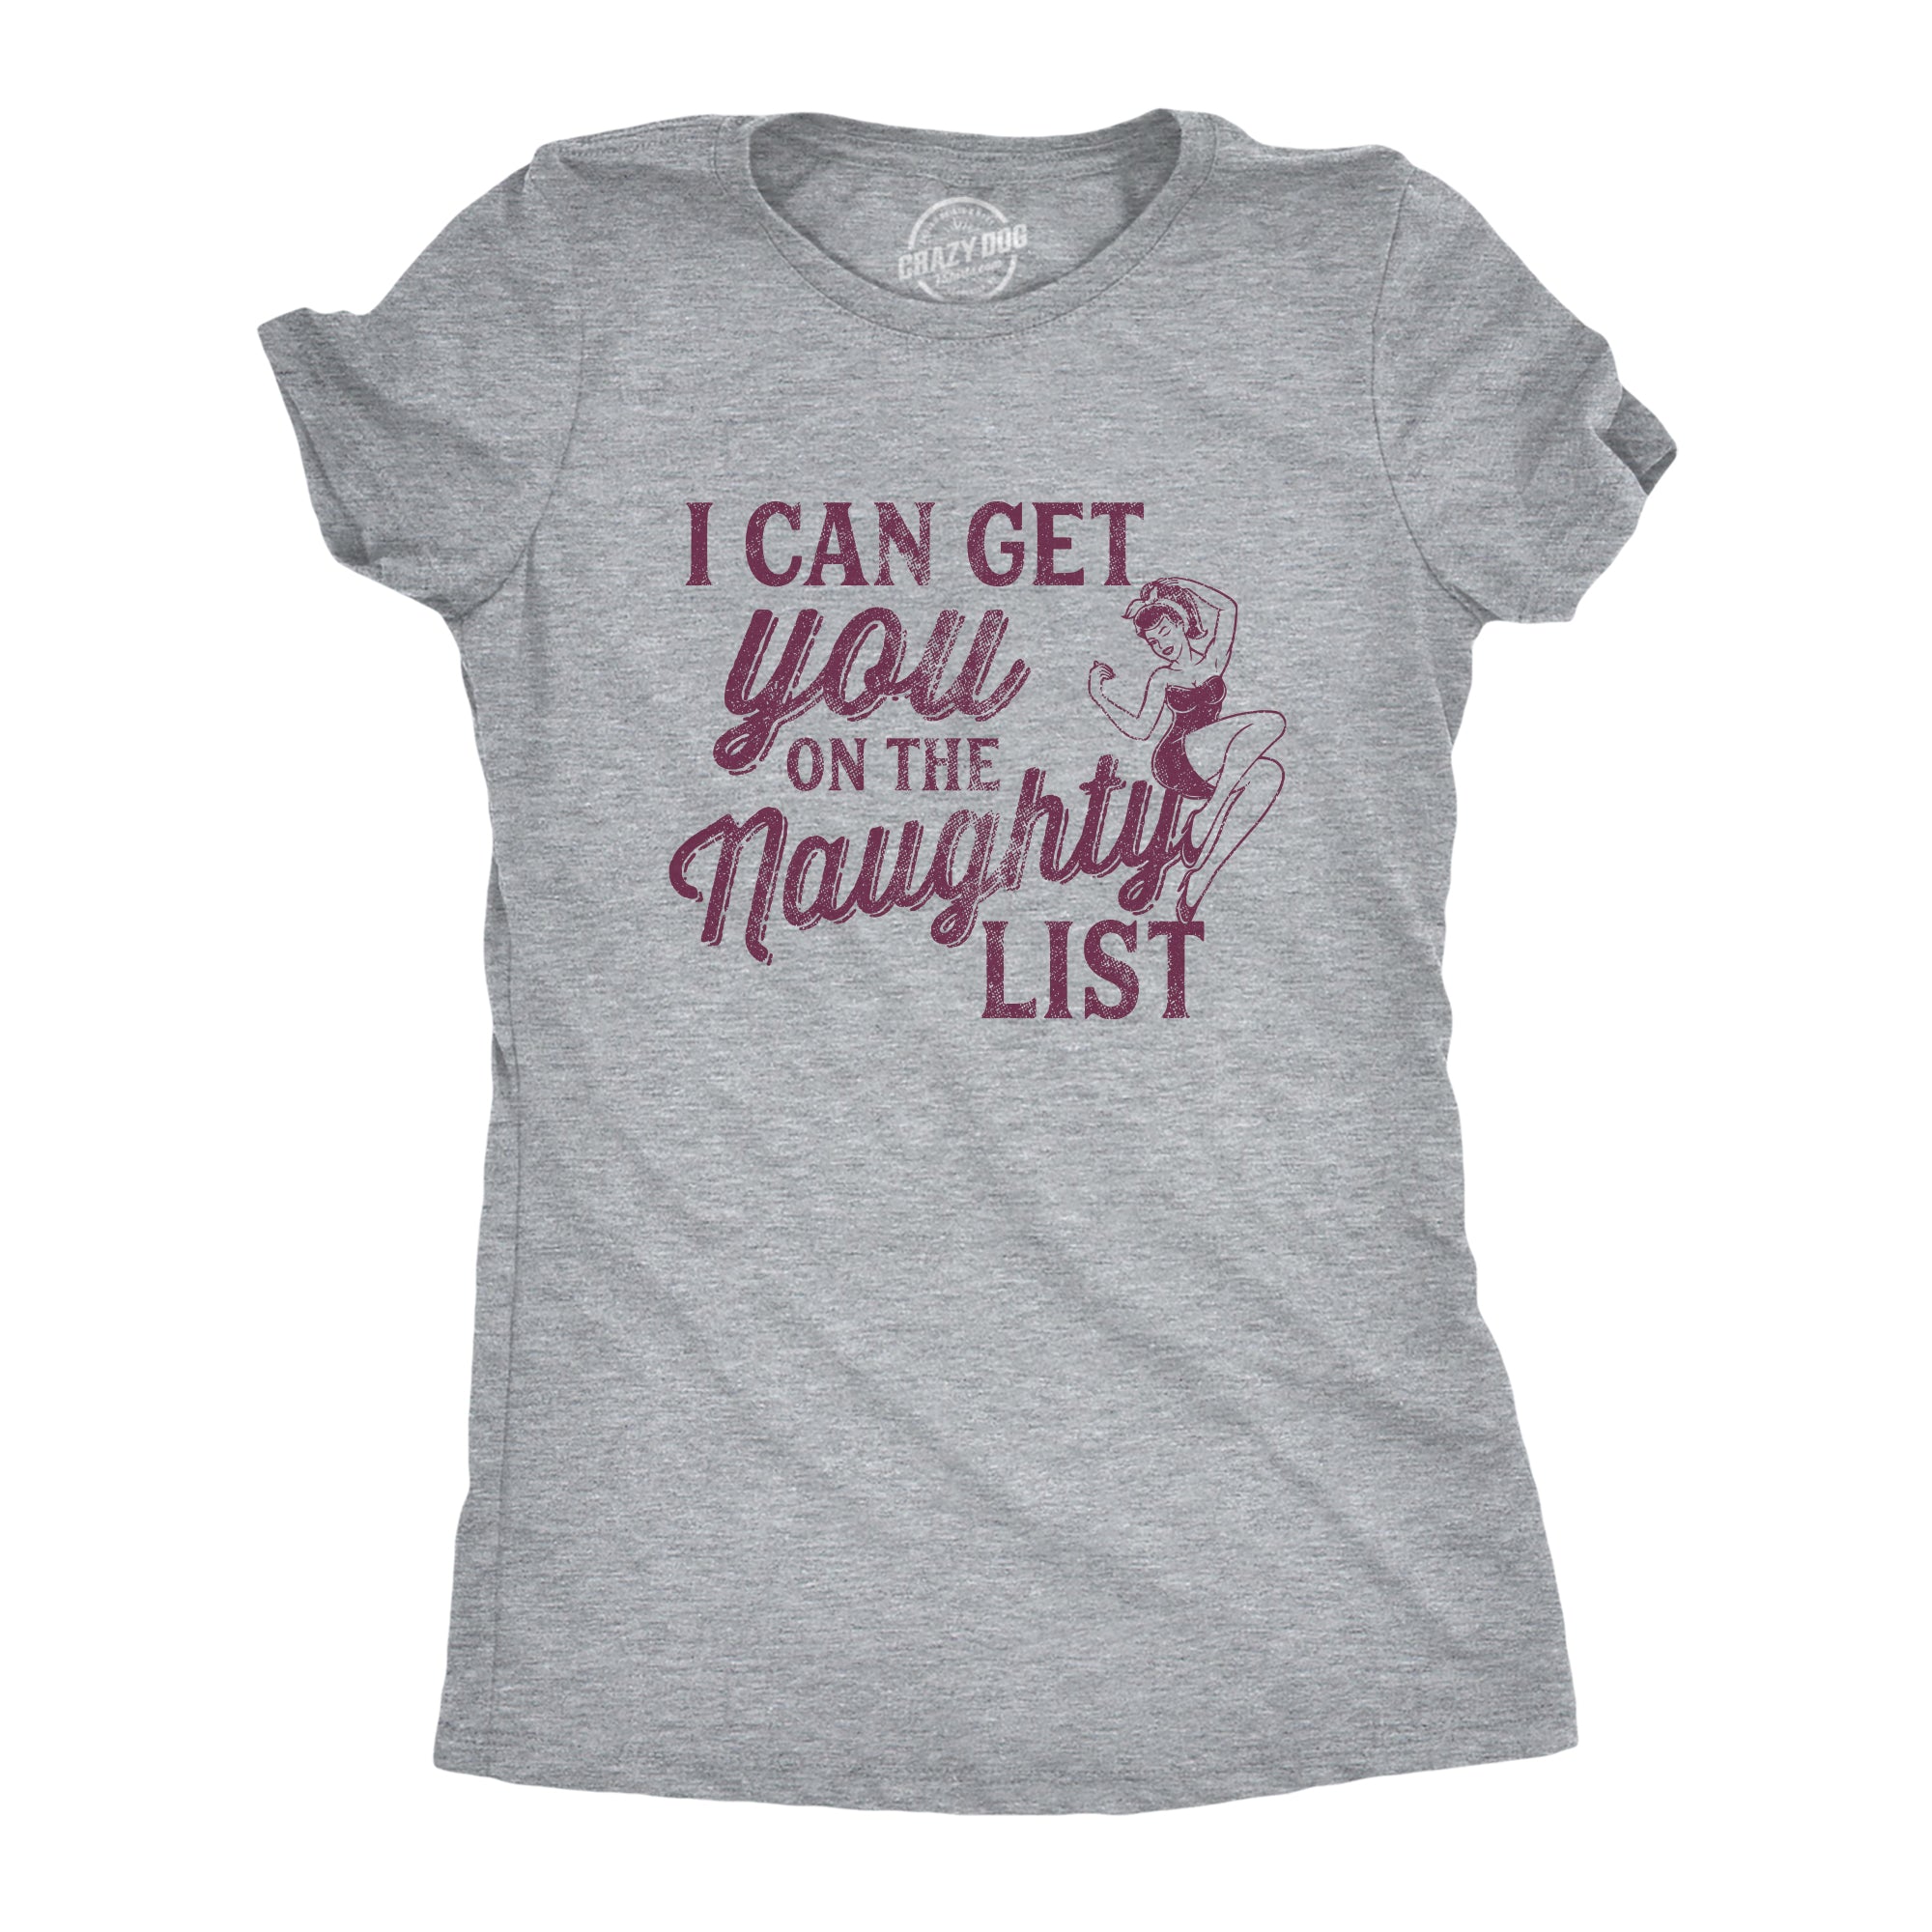 Funny Light Heather Grey - On the Naughty I Can Get You On The Naughty List Womens T Shirt Nerdy Christmas Sex Tee